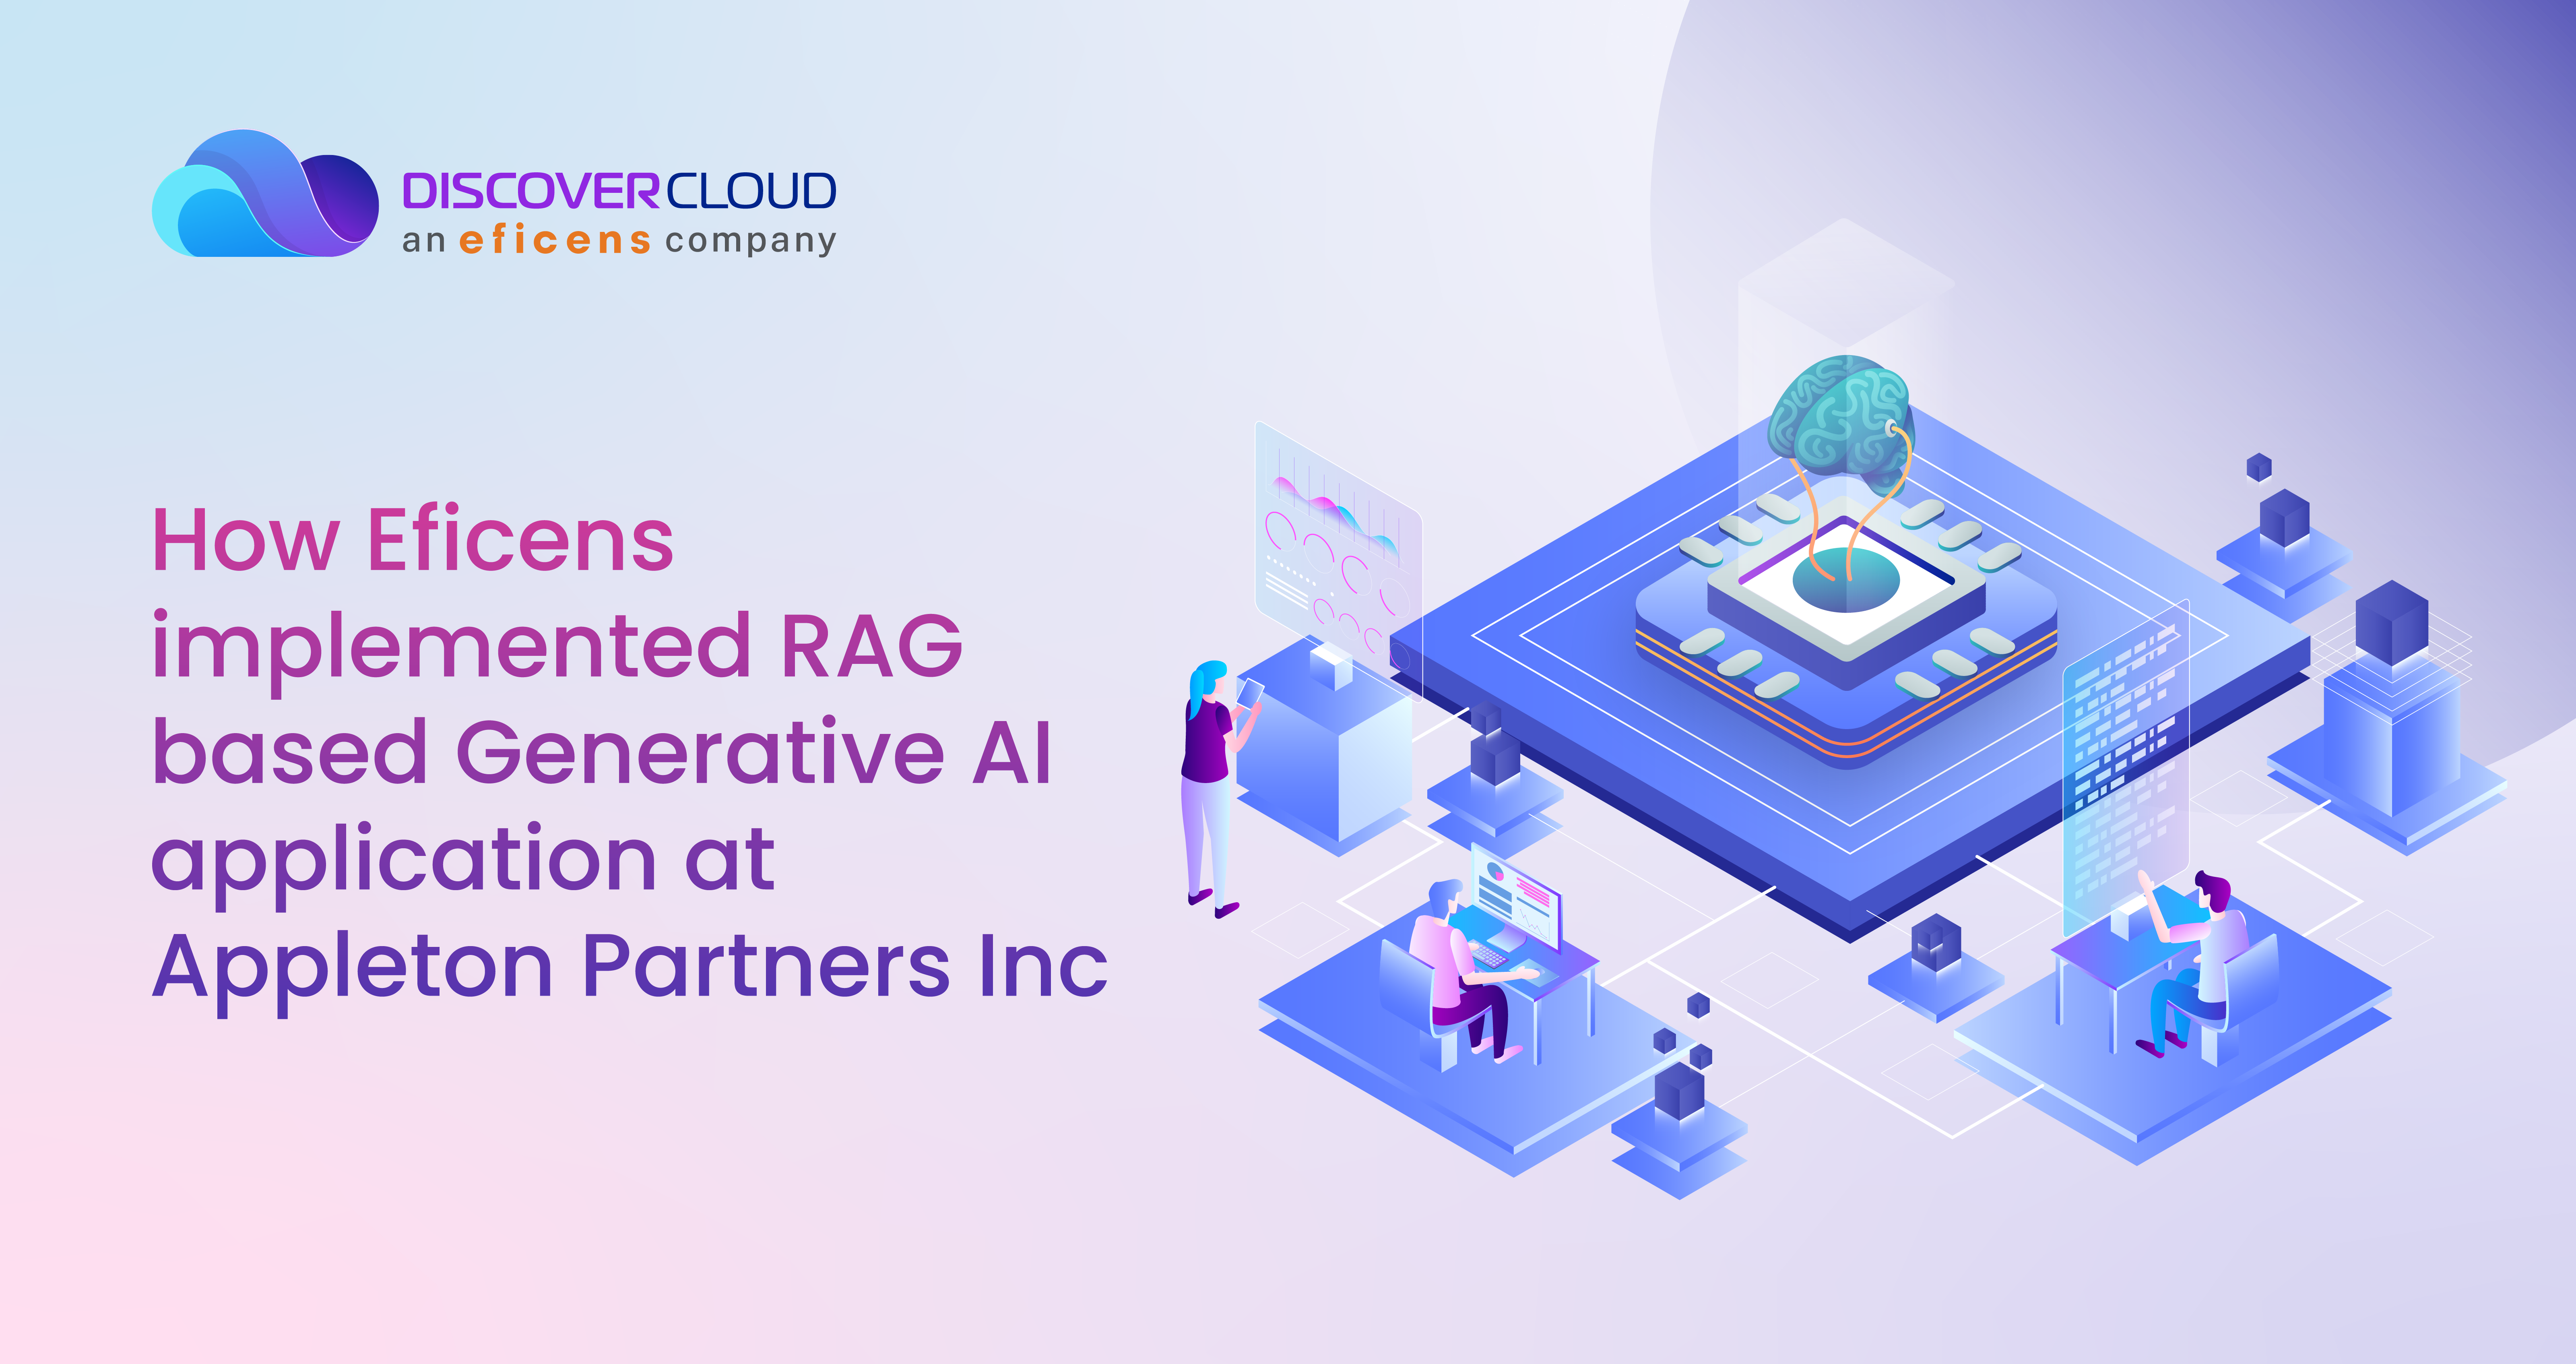 How Eficens implemented RAG based Generative AI application at Appleton Partners Inc.